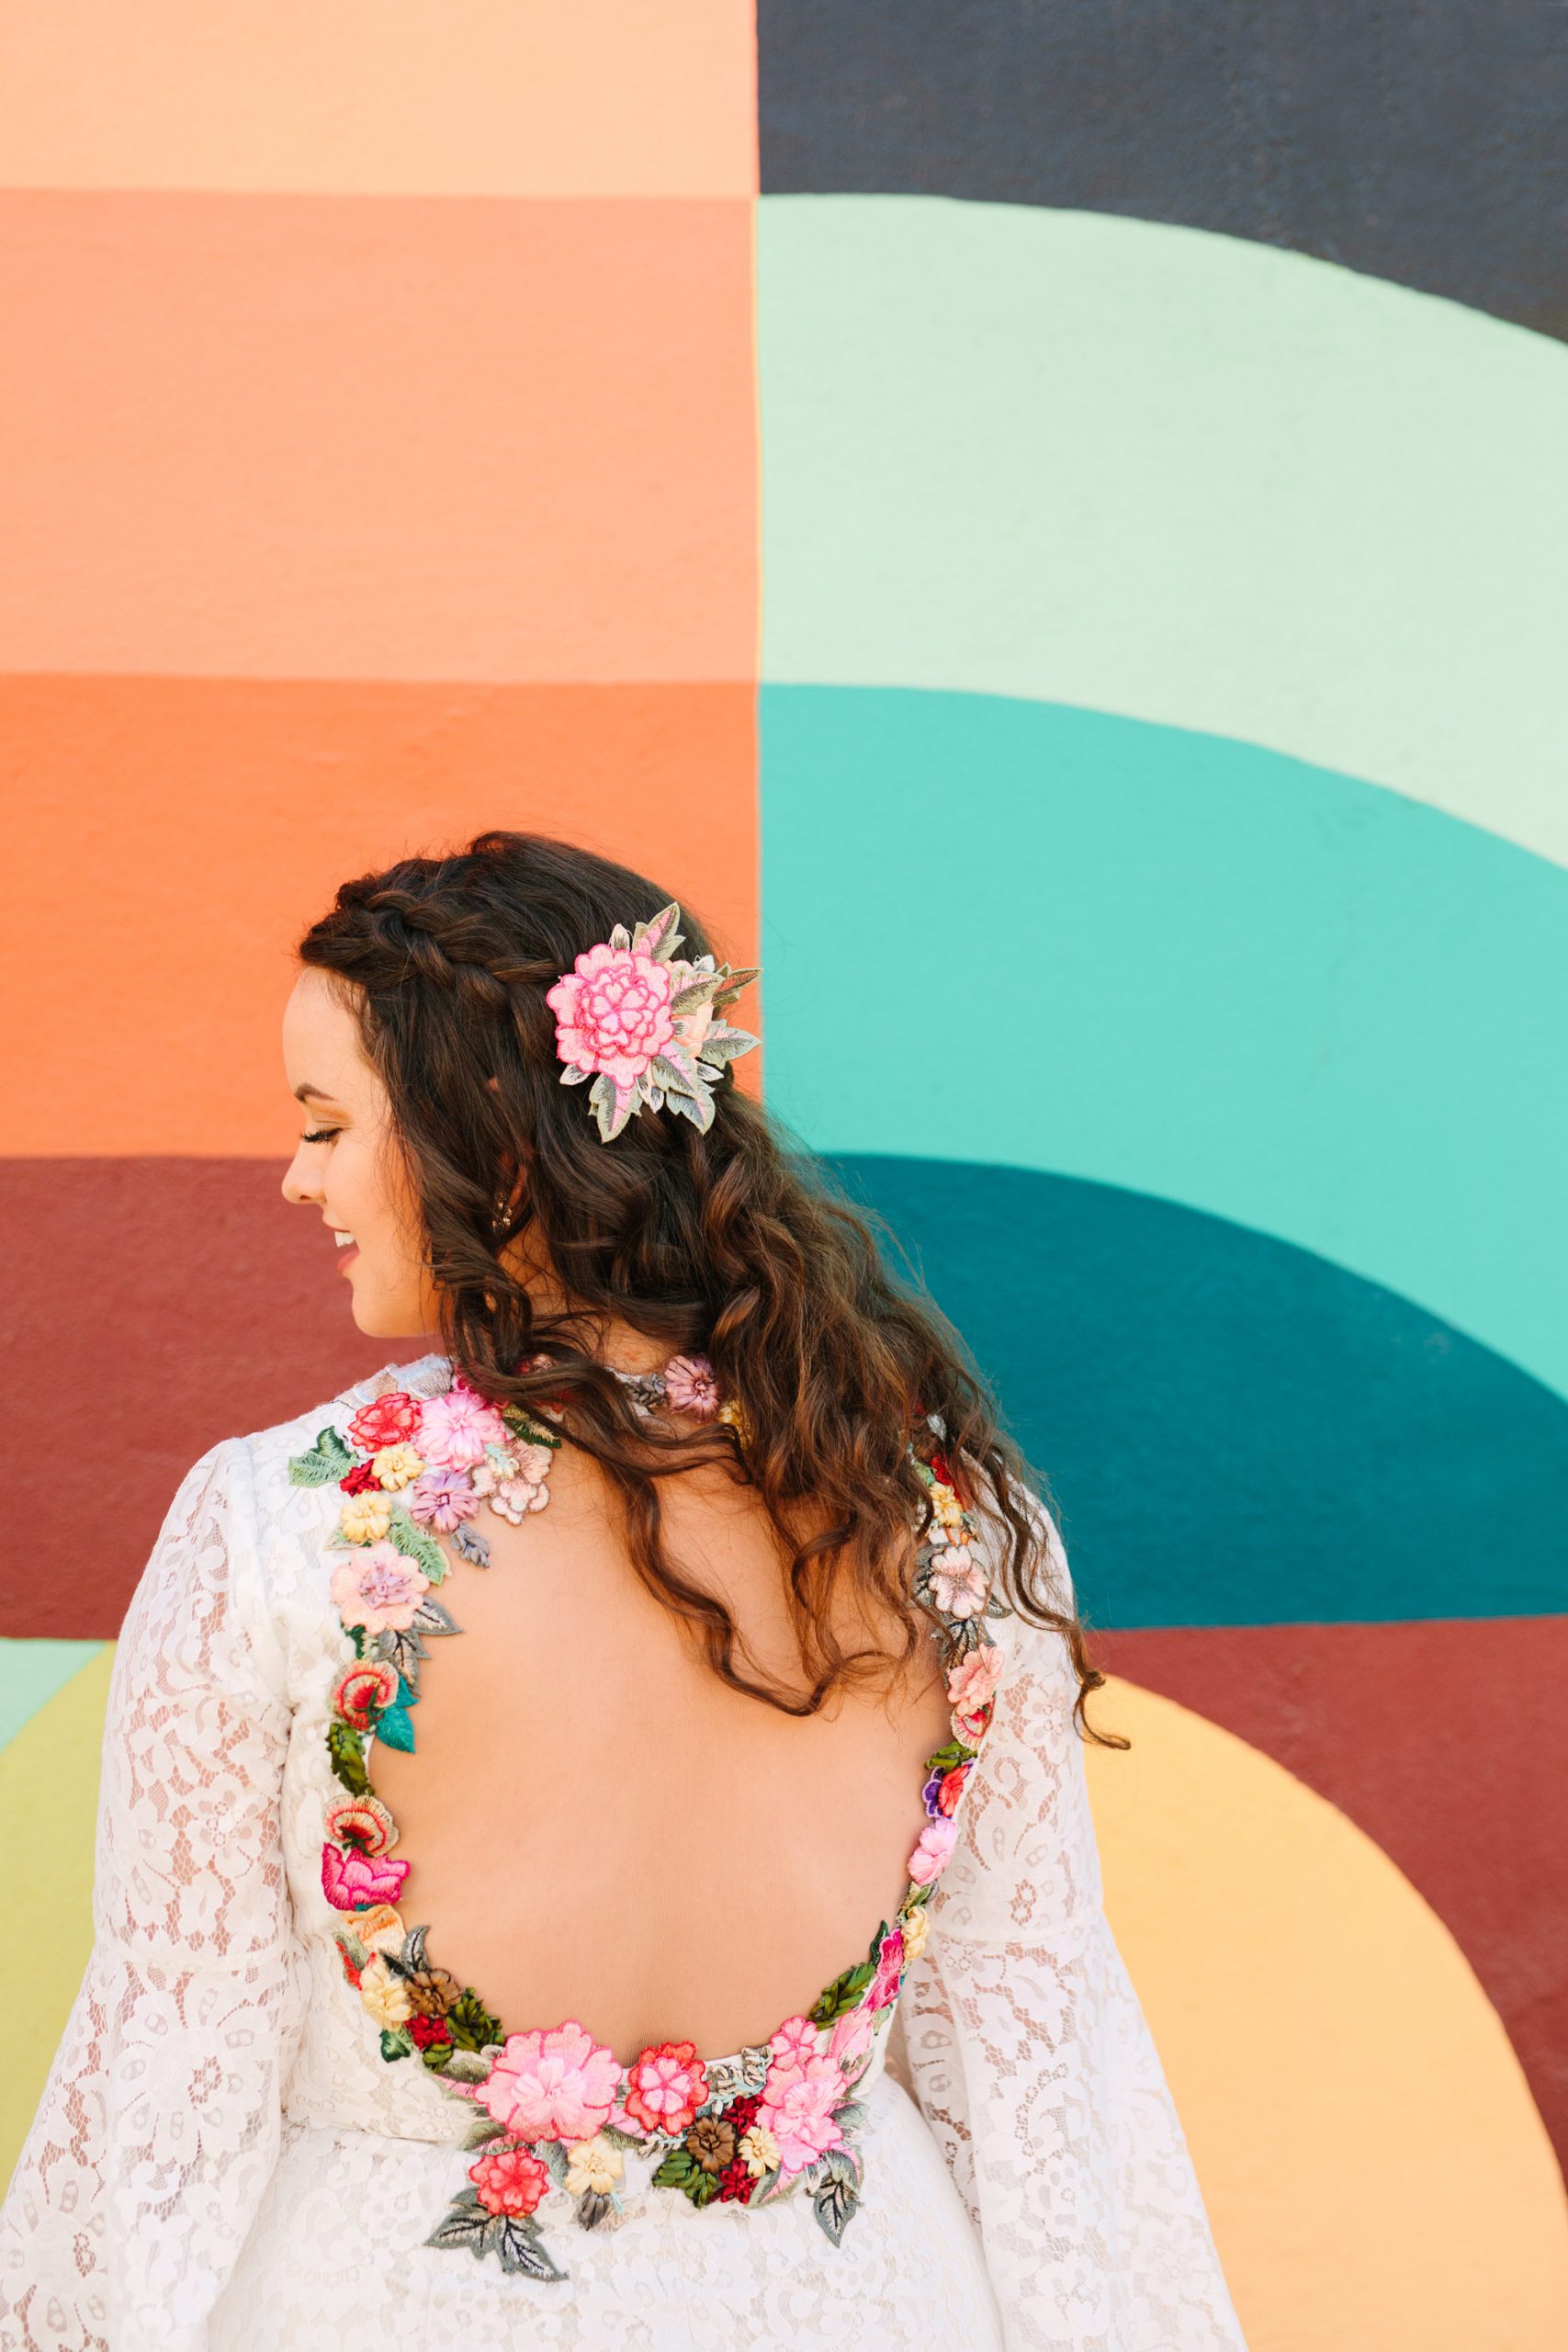 Bride in custom colorful embroidered gown by Heirloom Bride - www.marycostaweddings.com